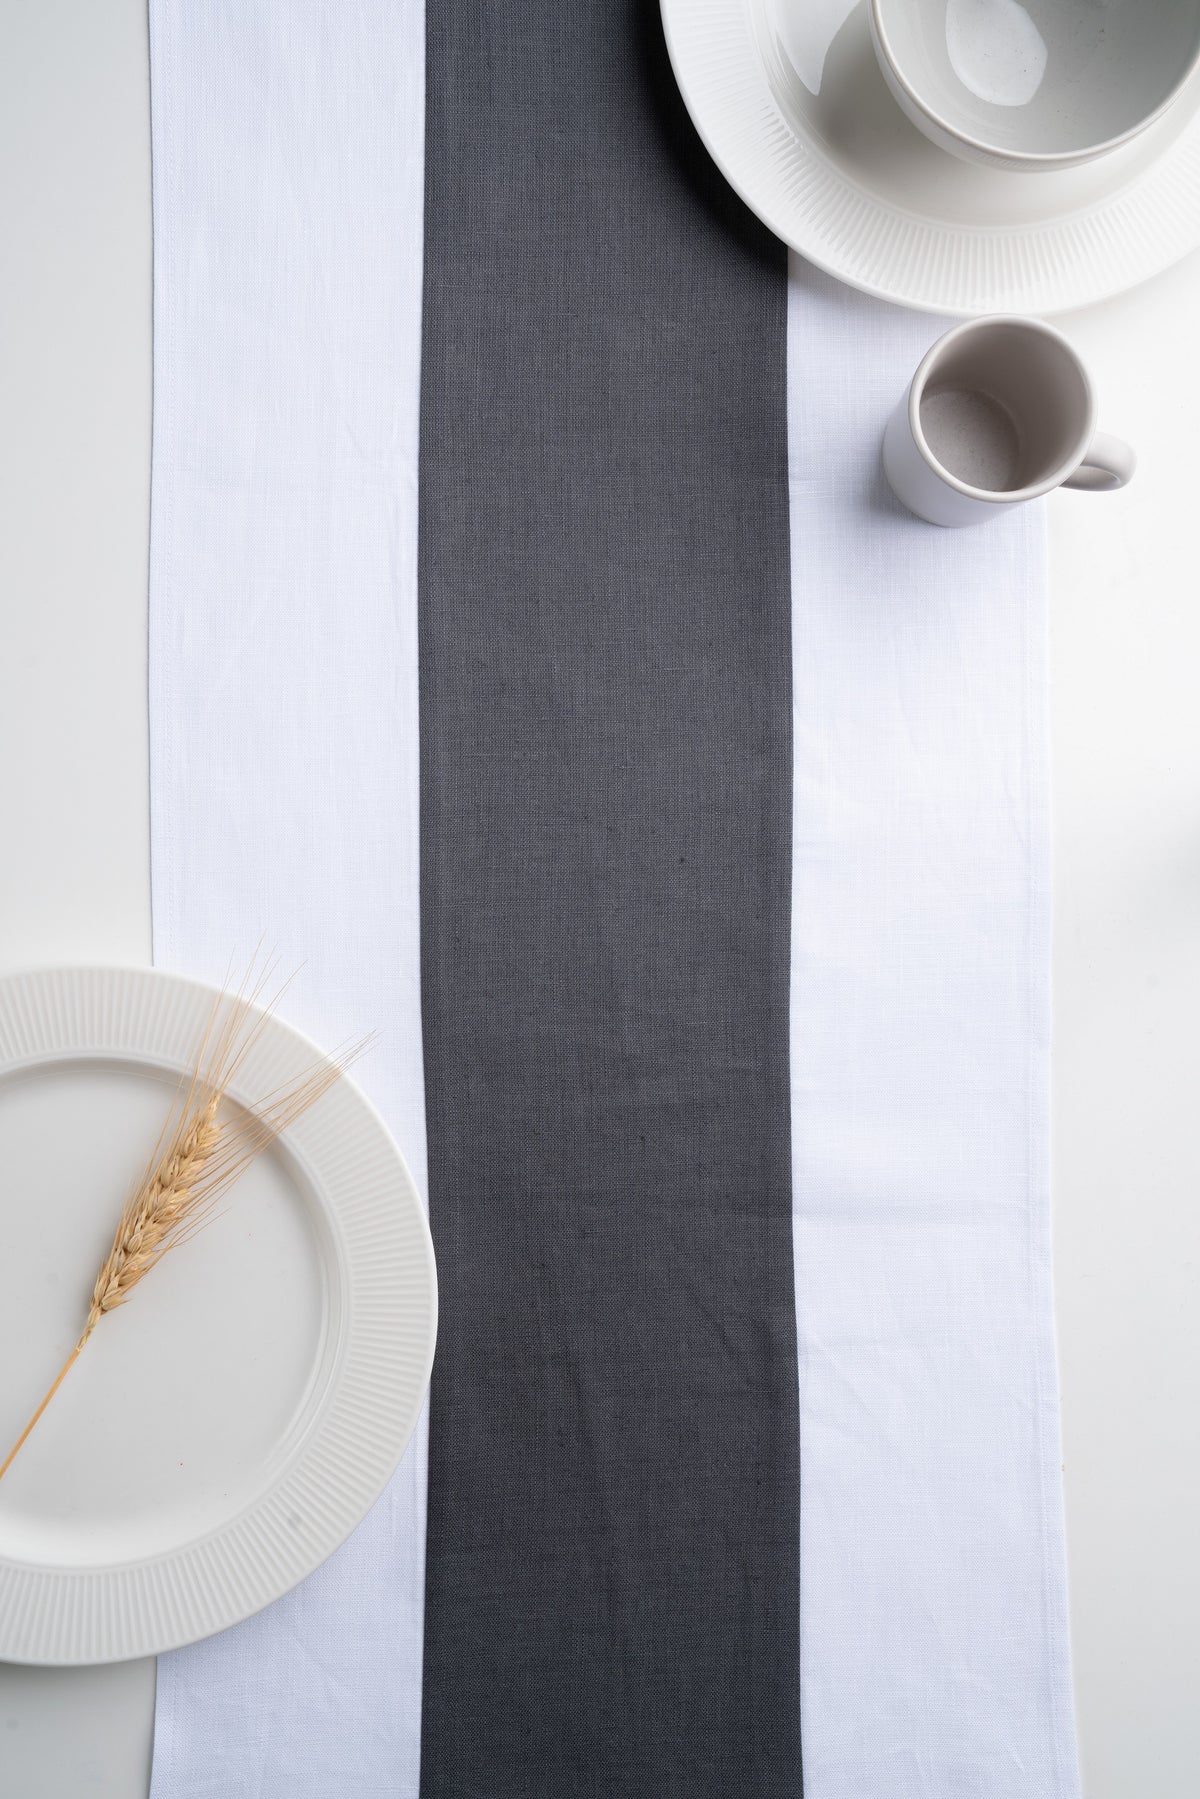 White and Charcoal Grey Linen Table Runner - Splicing